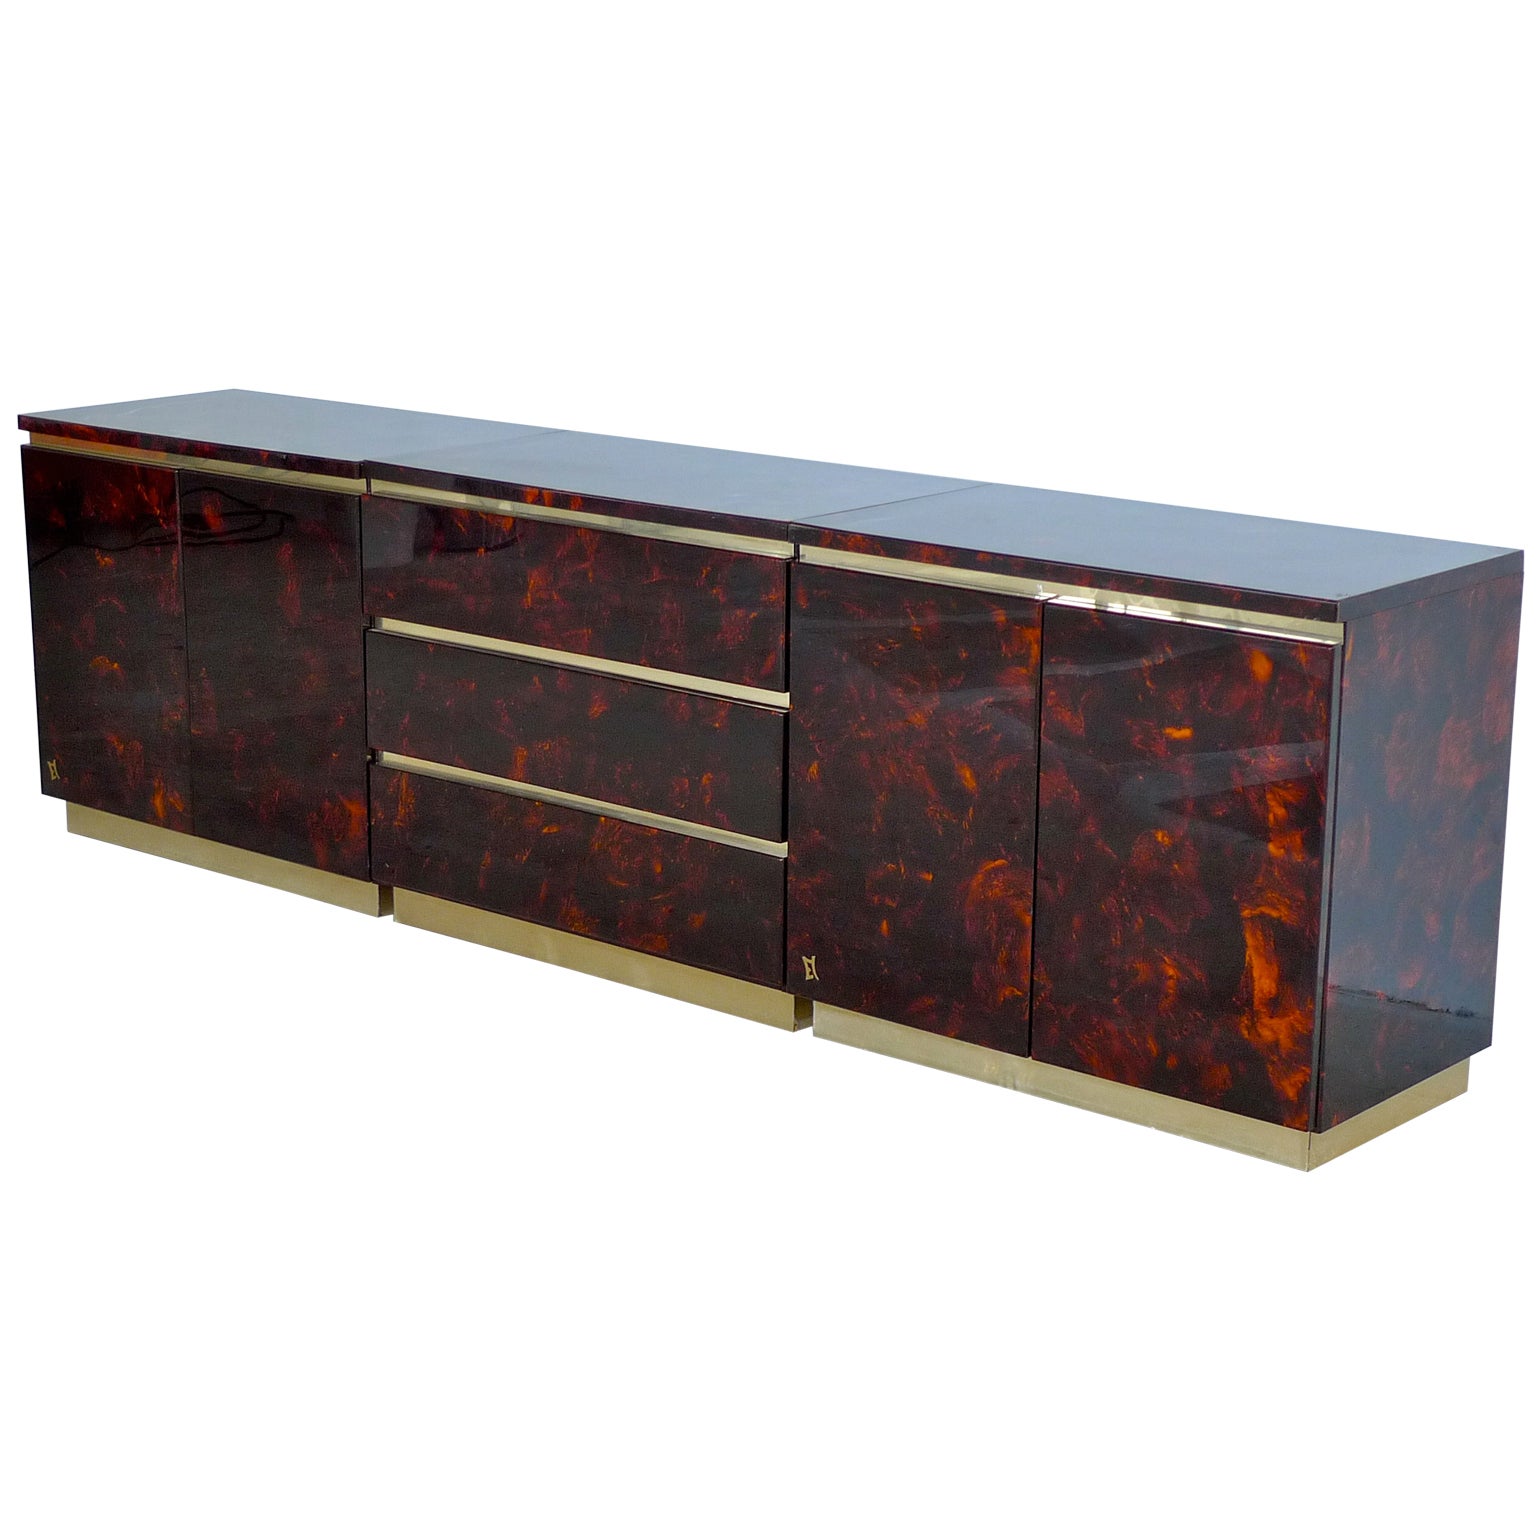 French 1970's Tortoise Lacquer & Brass Credenza in Three Sections